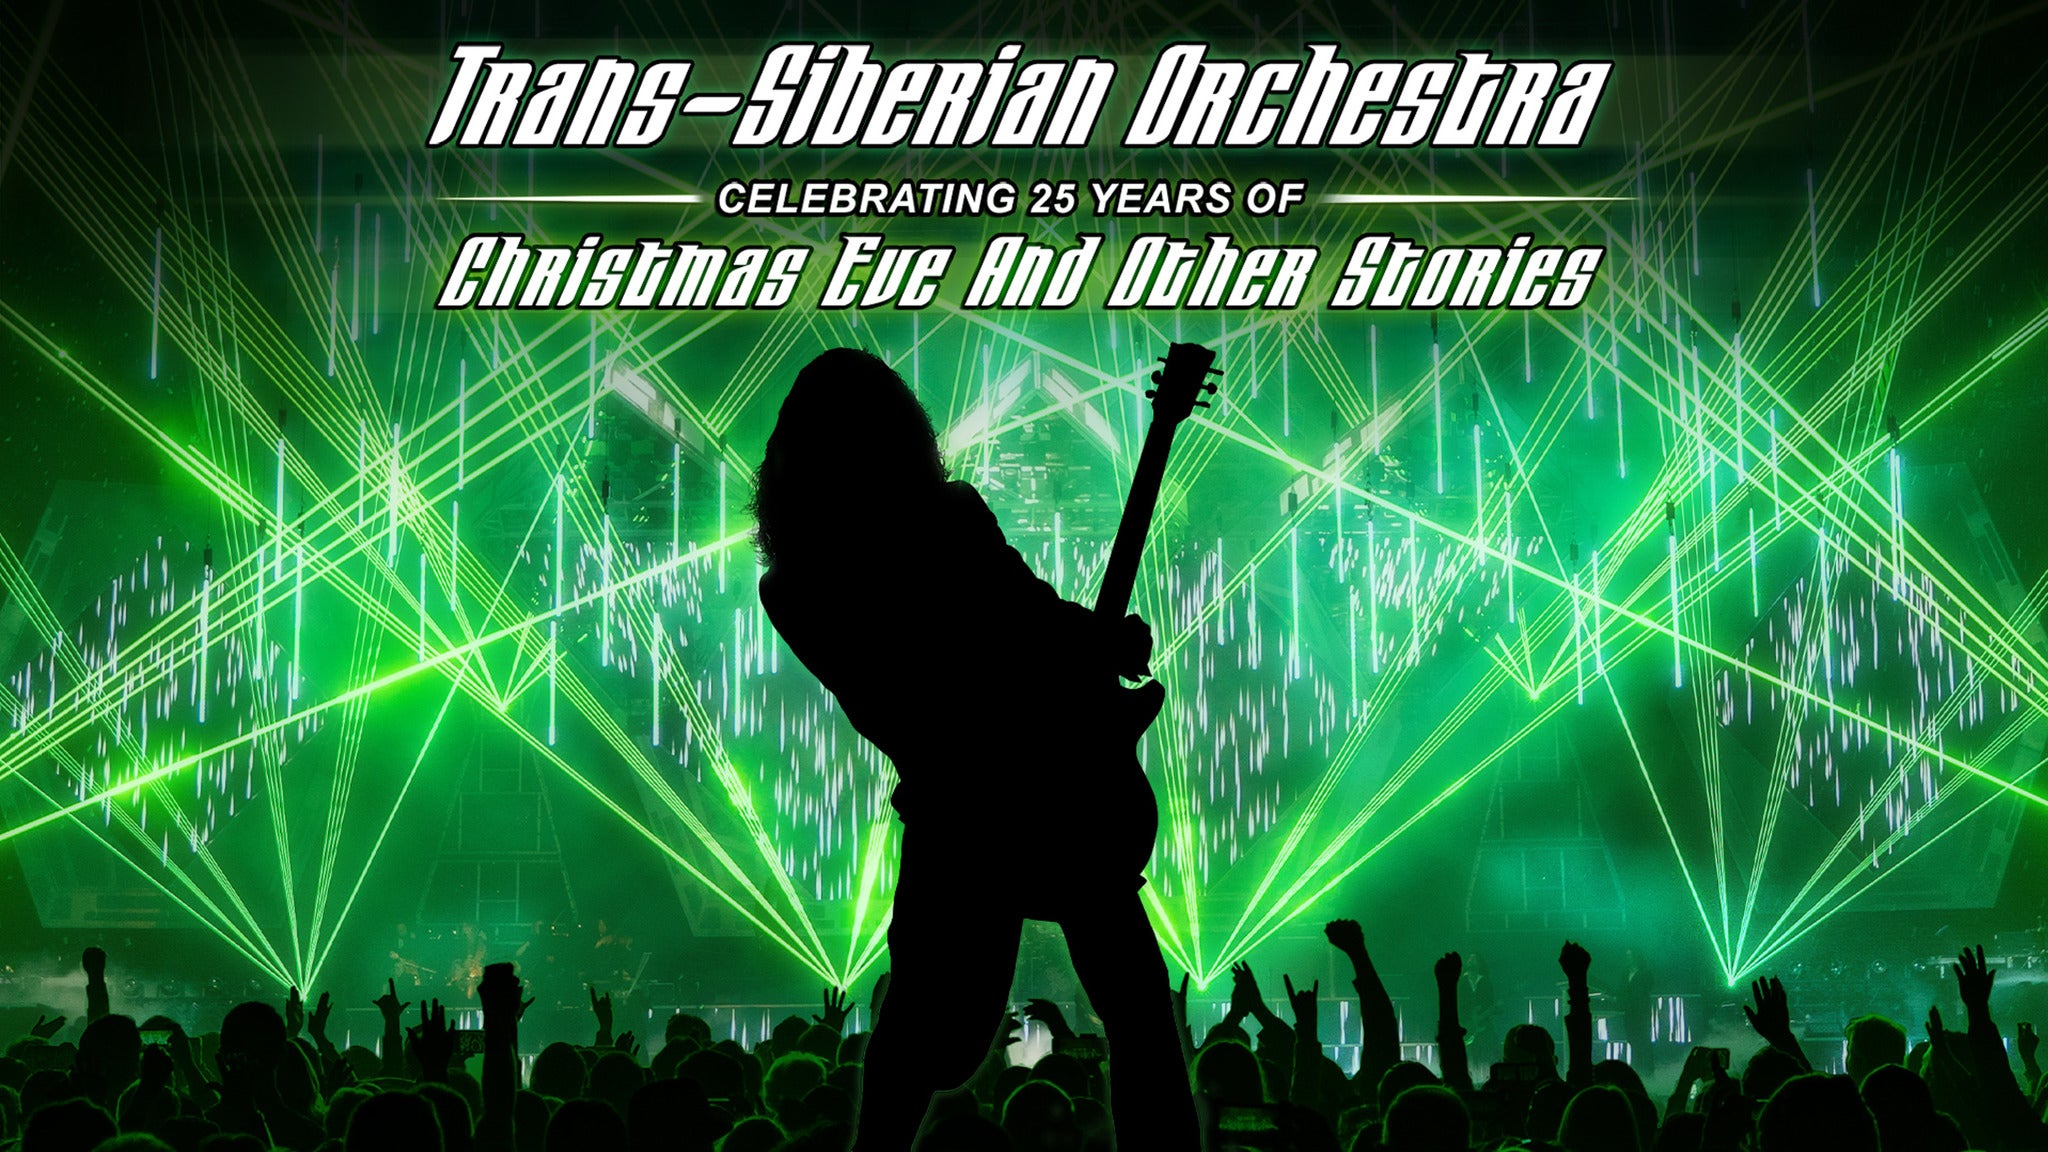 Trans-Siberian Orchestra-Christmas Eve & Other Stories in Toledo promo photo for Citi® Cardmember presale offer code